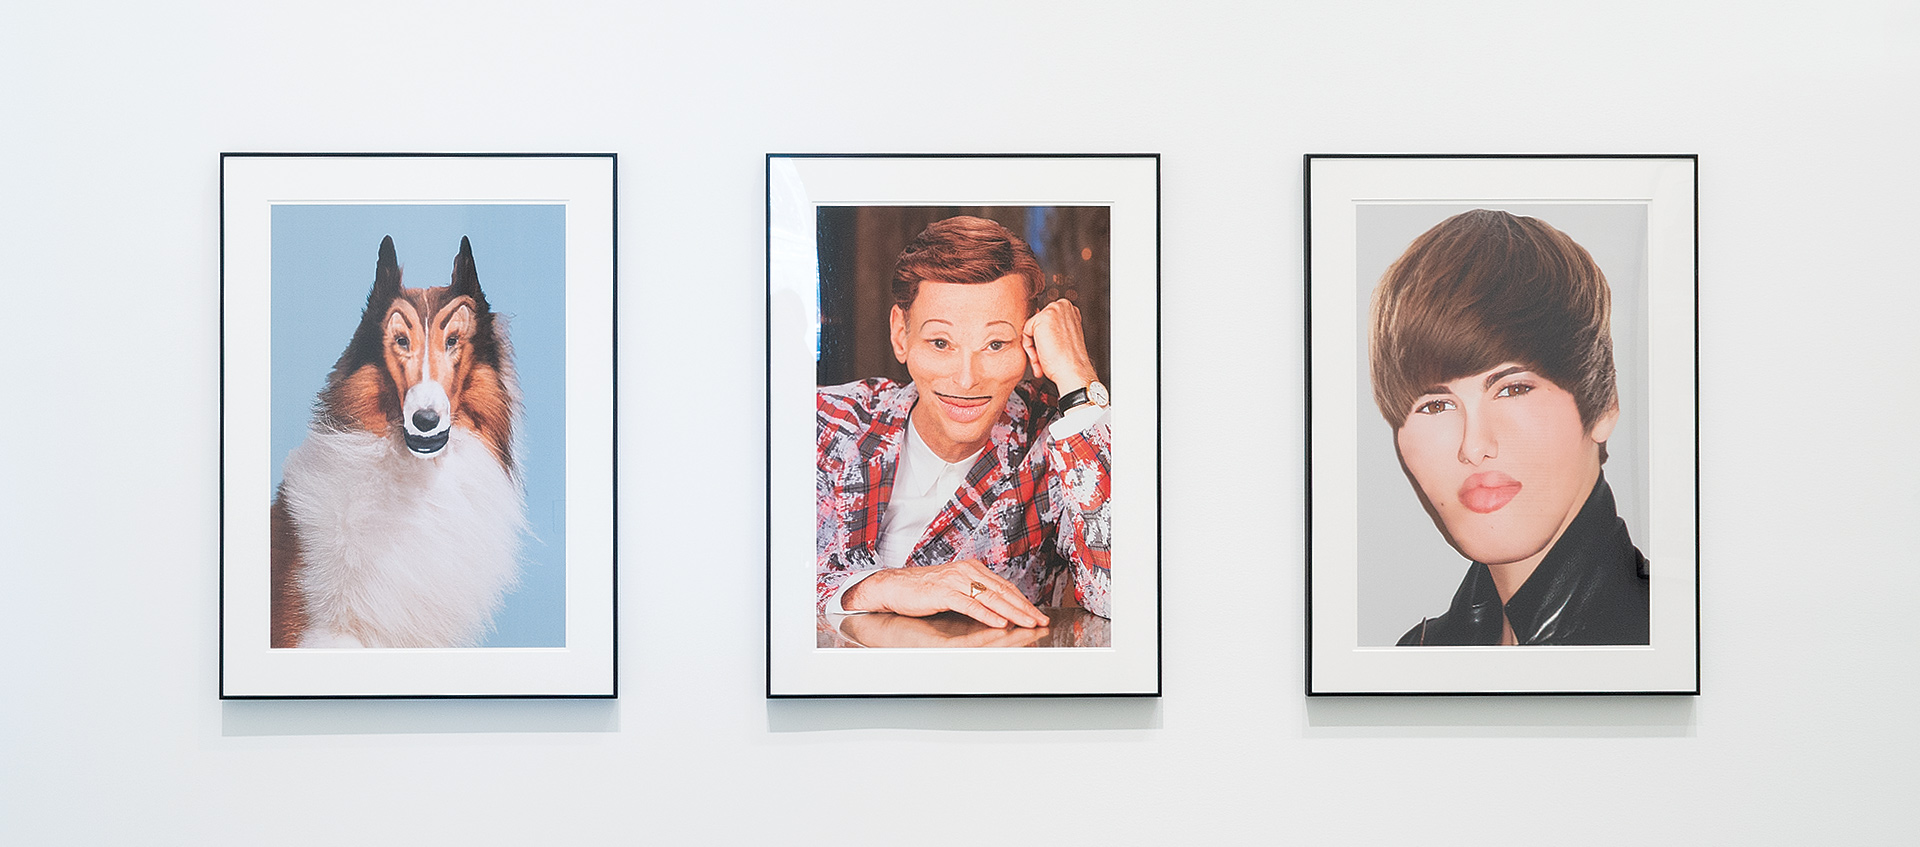 Line up of John Waters artworks including Lassie, a self portrait, and Justin Bieber